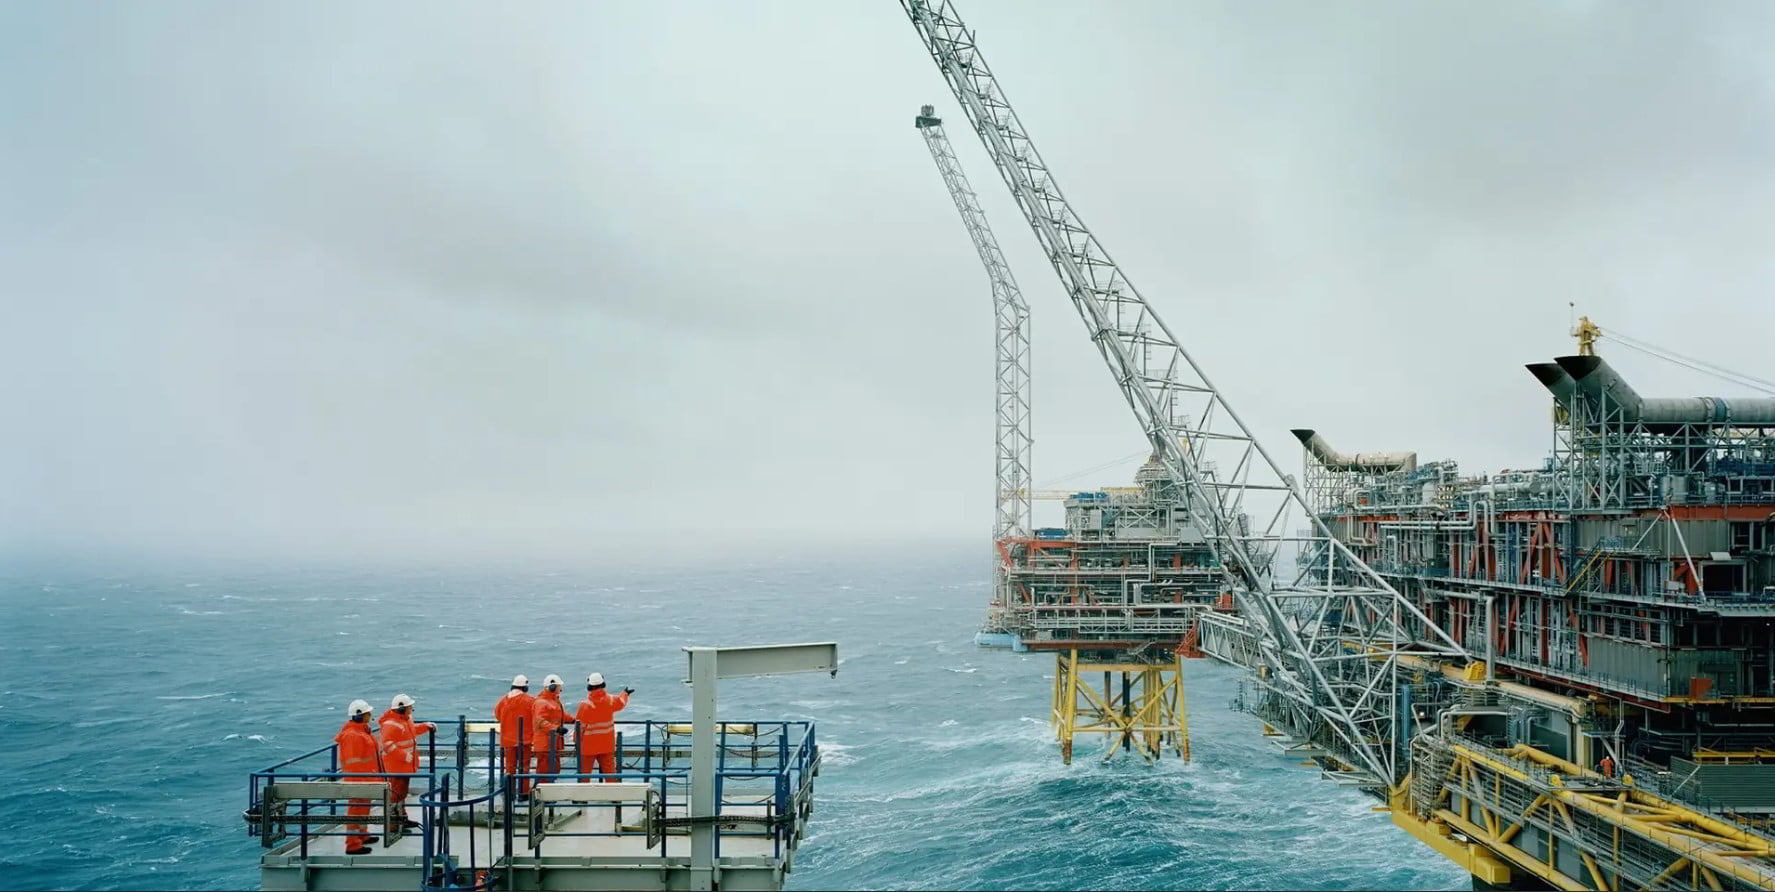 Fresh multi-year extension for UK firm covering Equinor’s oil & gas assets off Norway